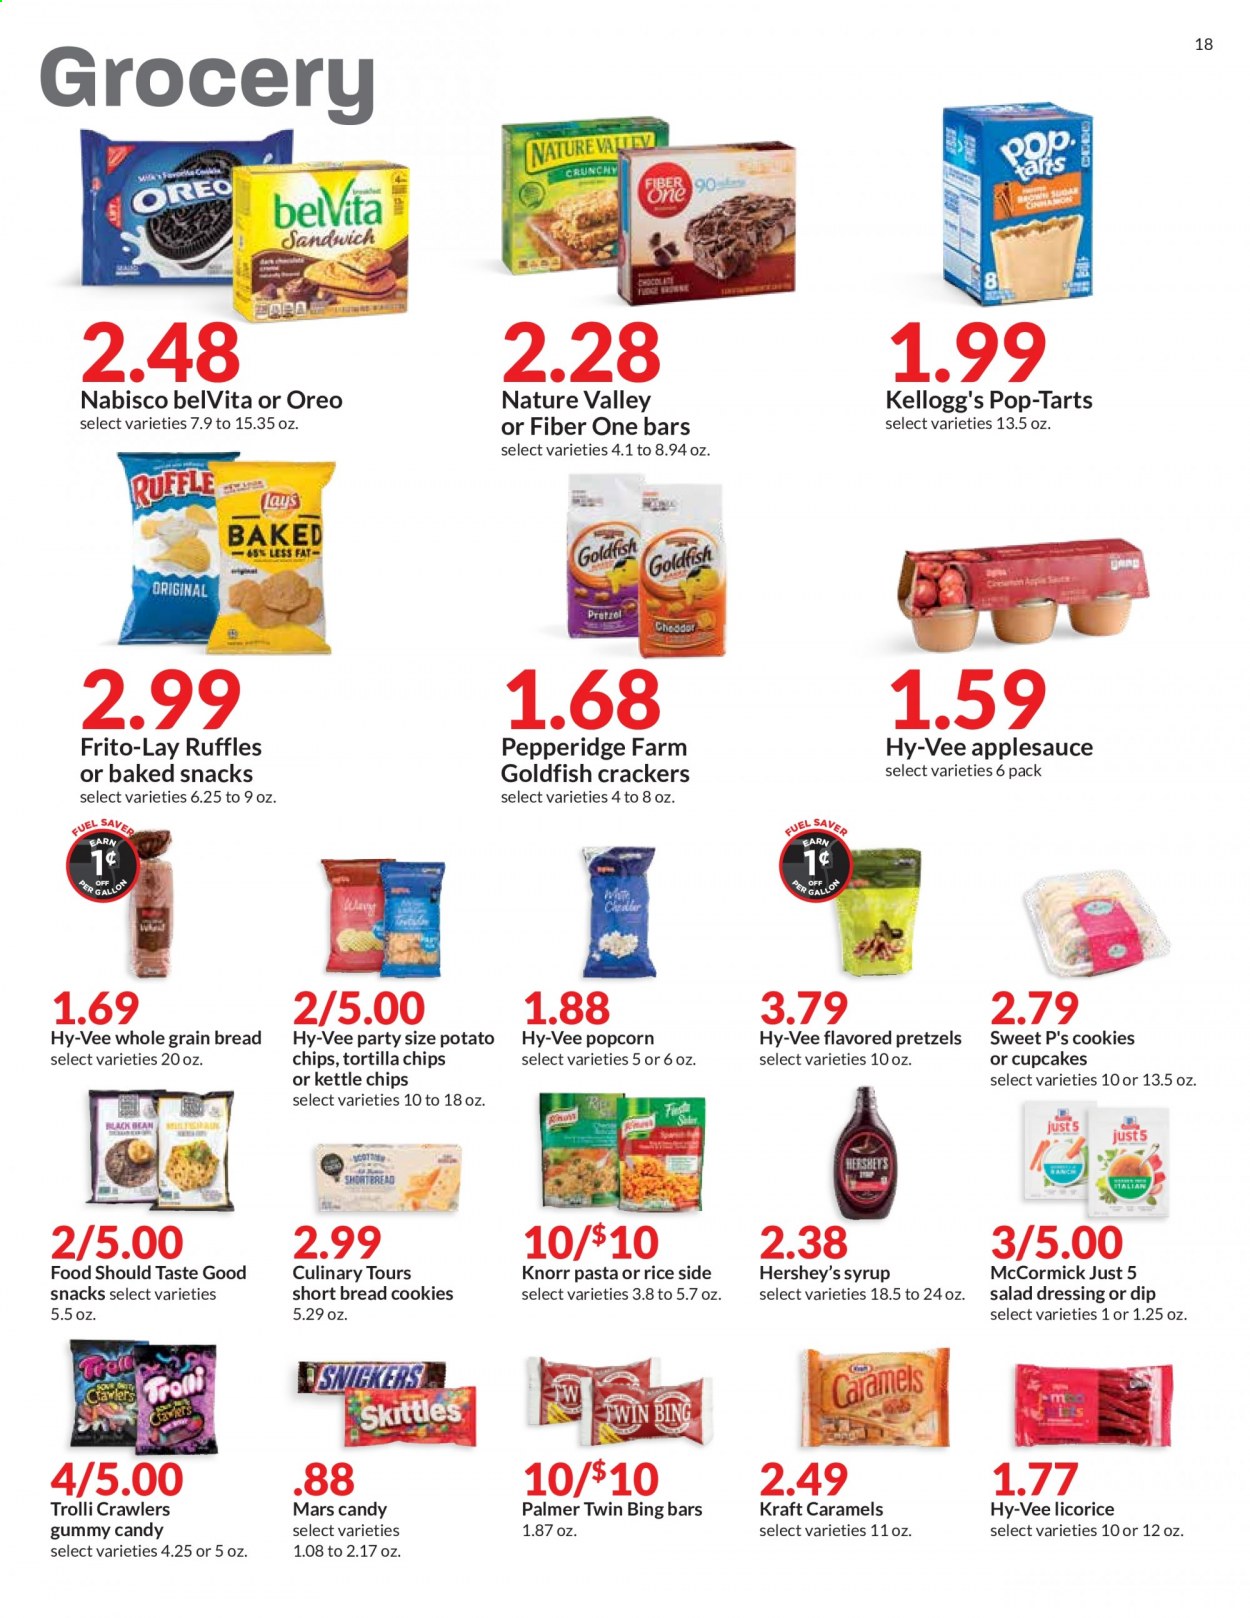 thumbnail - Hy-Vee Flyer - 04/14/2021 - 04/20/2021 - Sales products - bread, pretzels, cupcake, sandwich, Knorr, Kraft®, Oreo, dip, Hershey's, cookies, snack, Trolli, Mars, crackers, Kellogg's, Skittles, Pop-Tarts, tortilla chips, potato chips, chips, Lay’s, popcorn, Goldfish, Frito-Lay, Ruffles, belVita, Nature Valley, Fiber One, rice, salad dressing, dressing, apple sauce, syrup. Page 18.